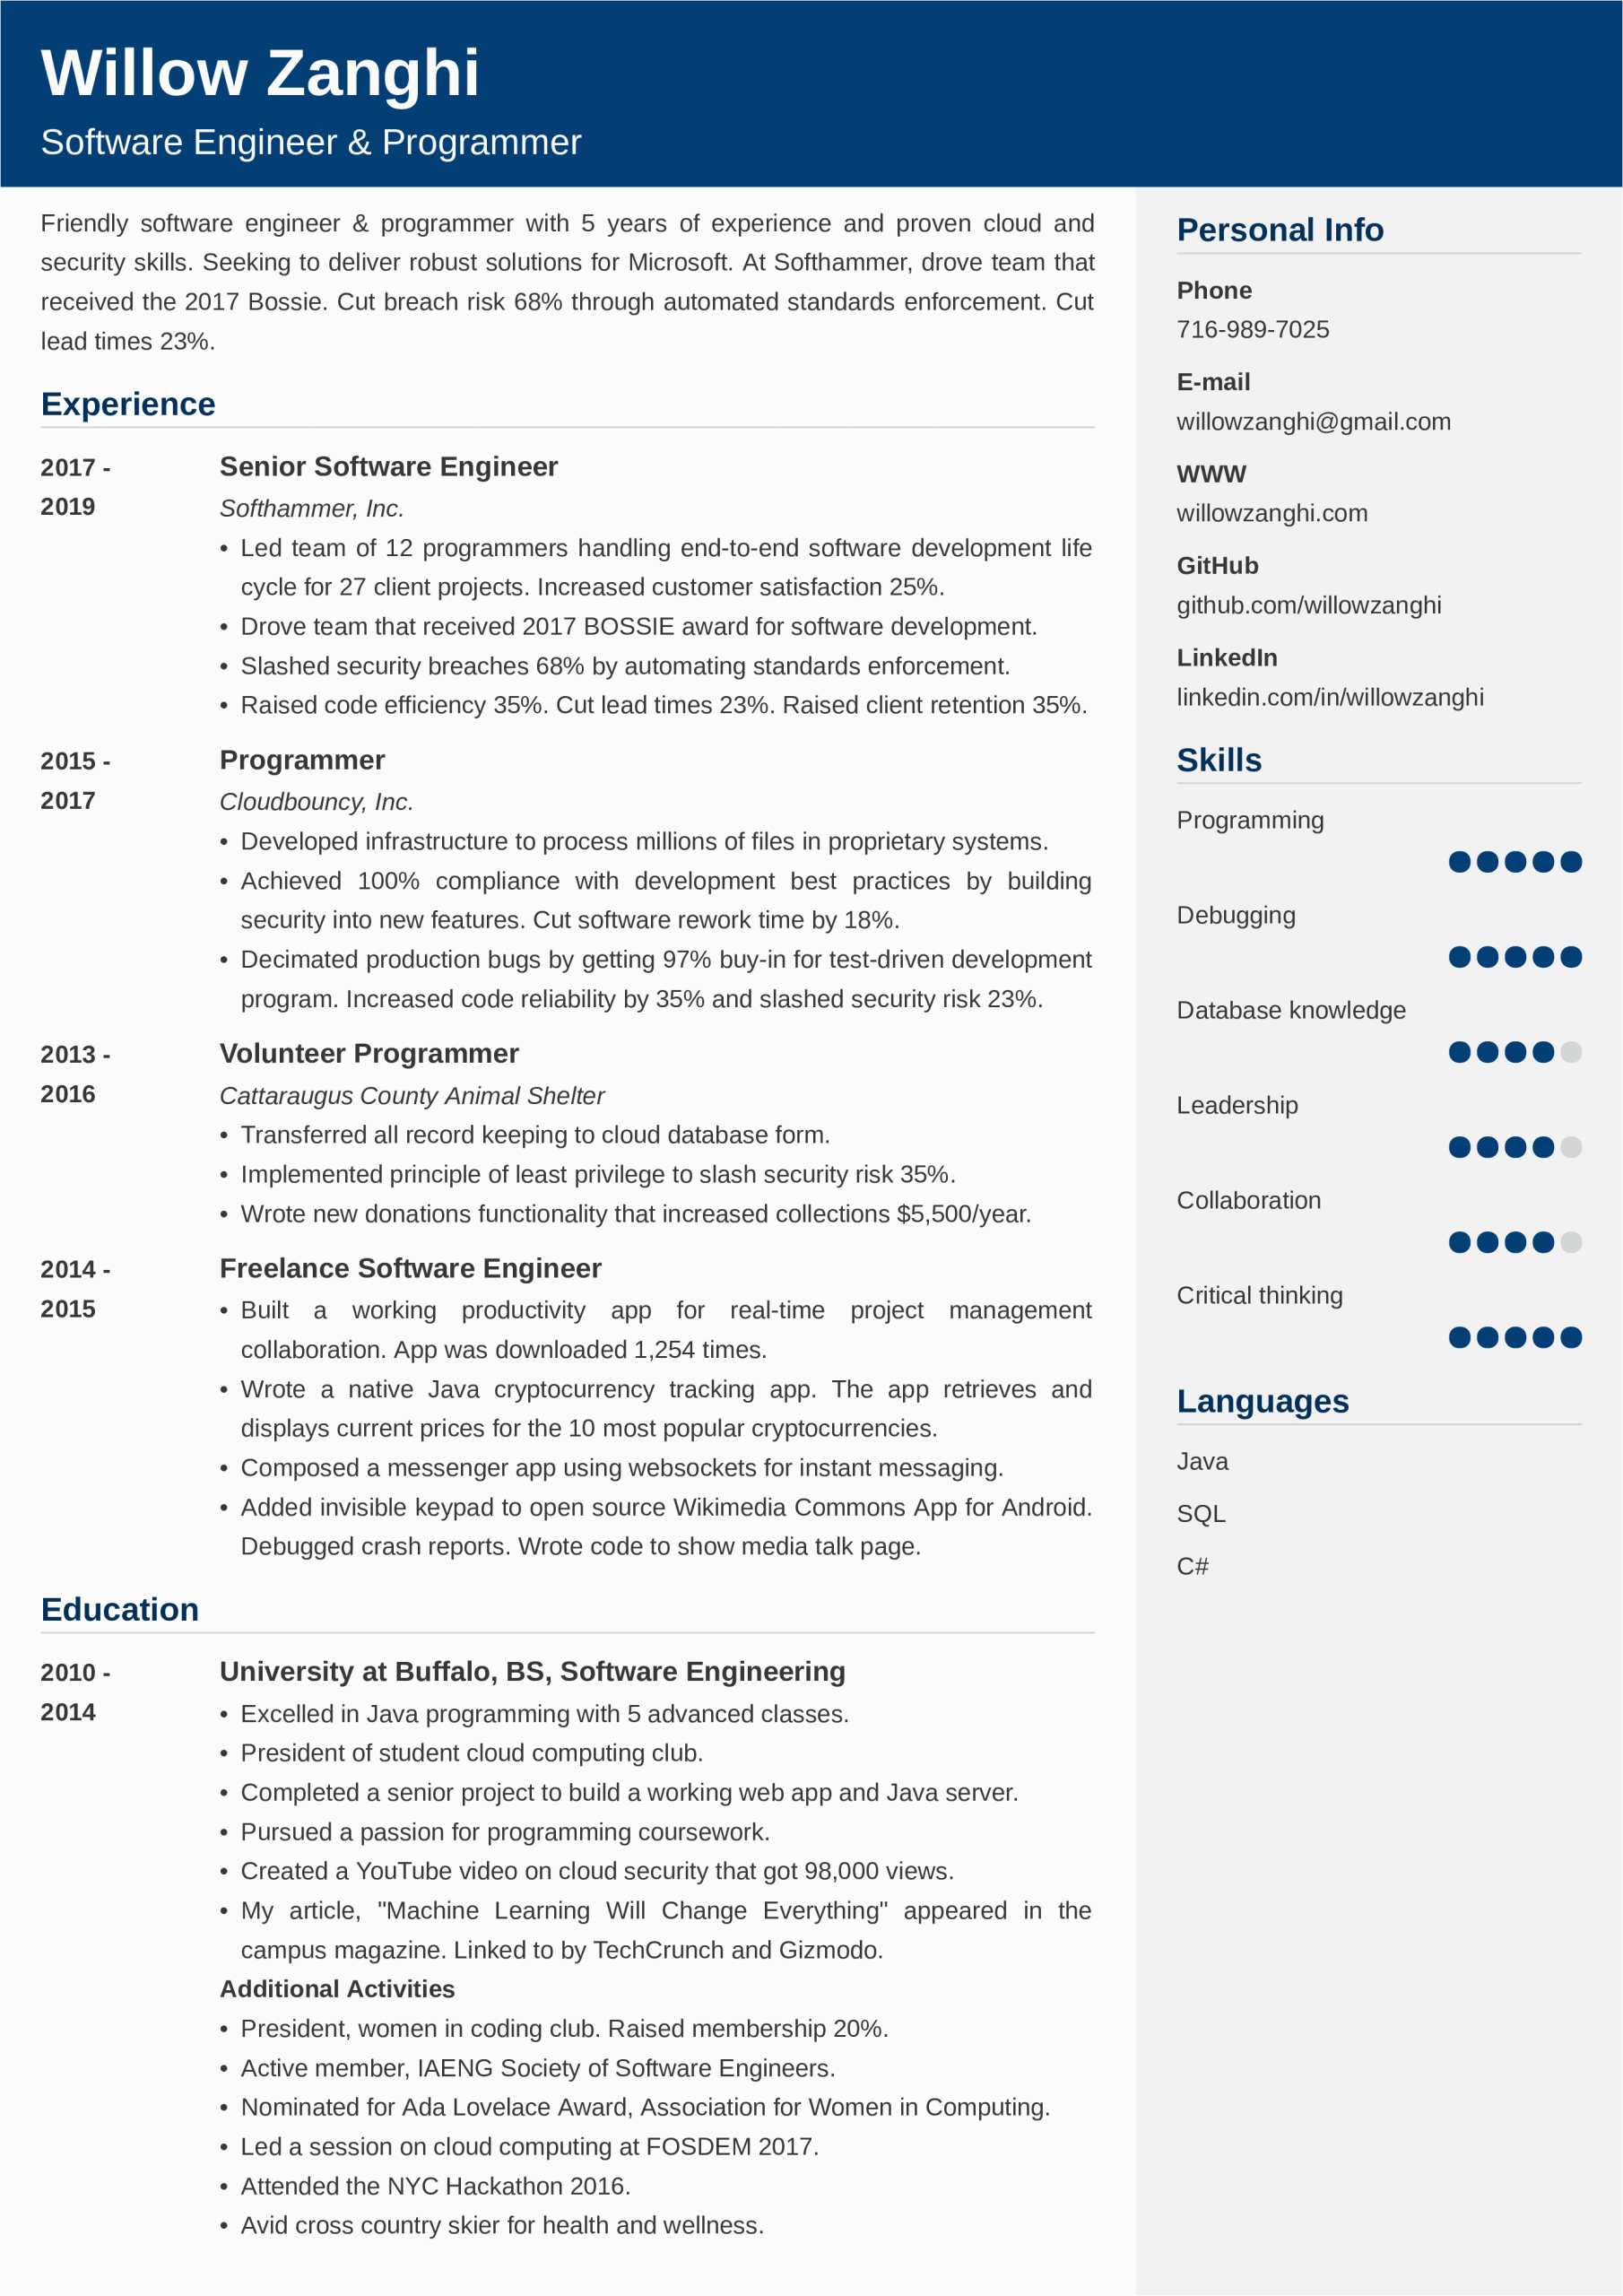 Resume Samples for Experienced software Professionals Sample Resume for Experienced software Engineer